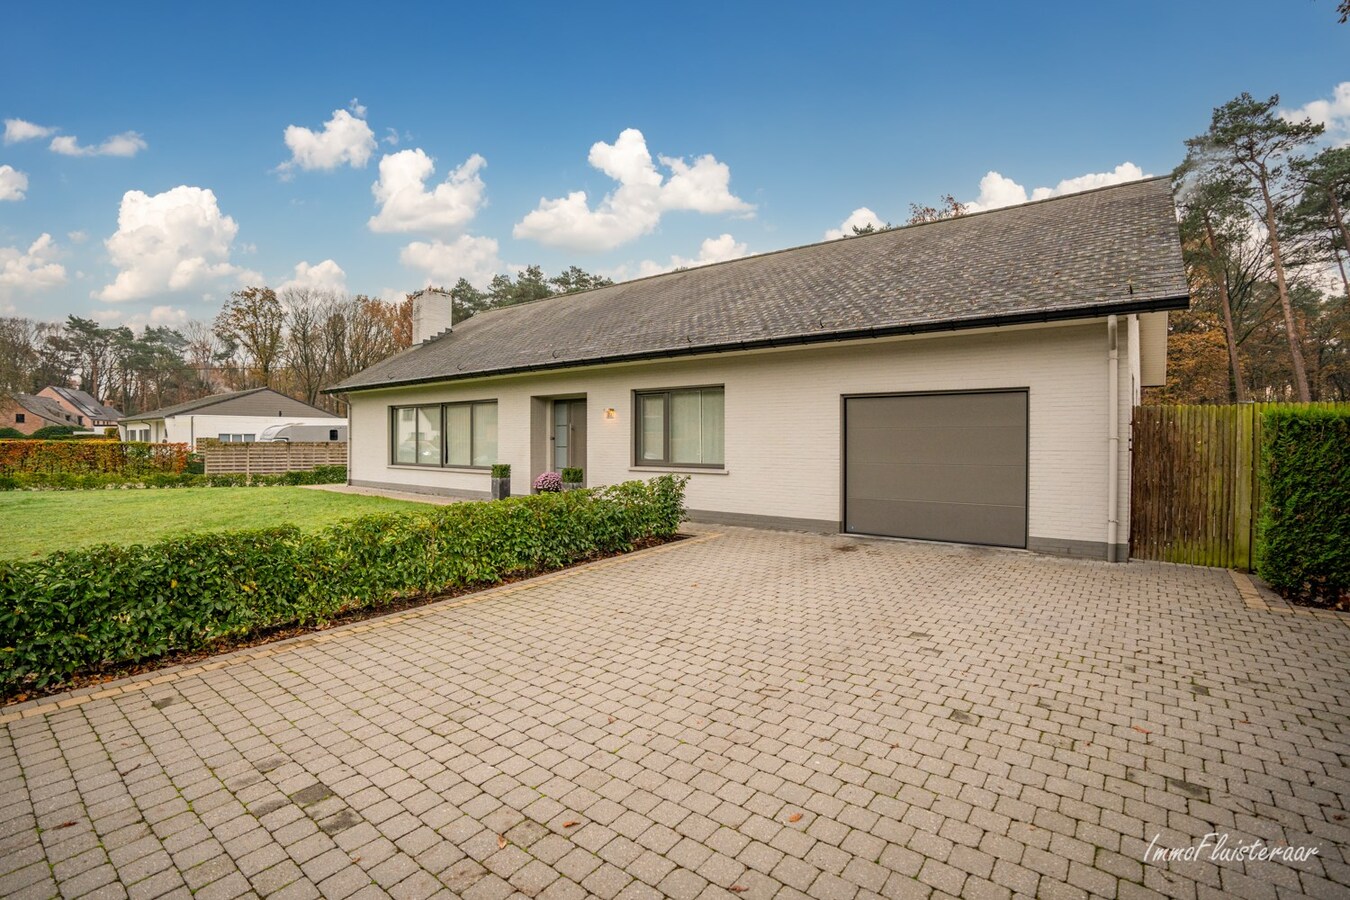 Property for sale |  with option - with restrictions in Zandhoven